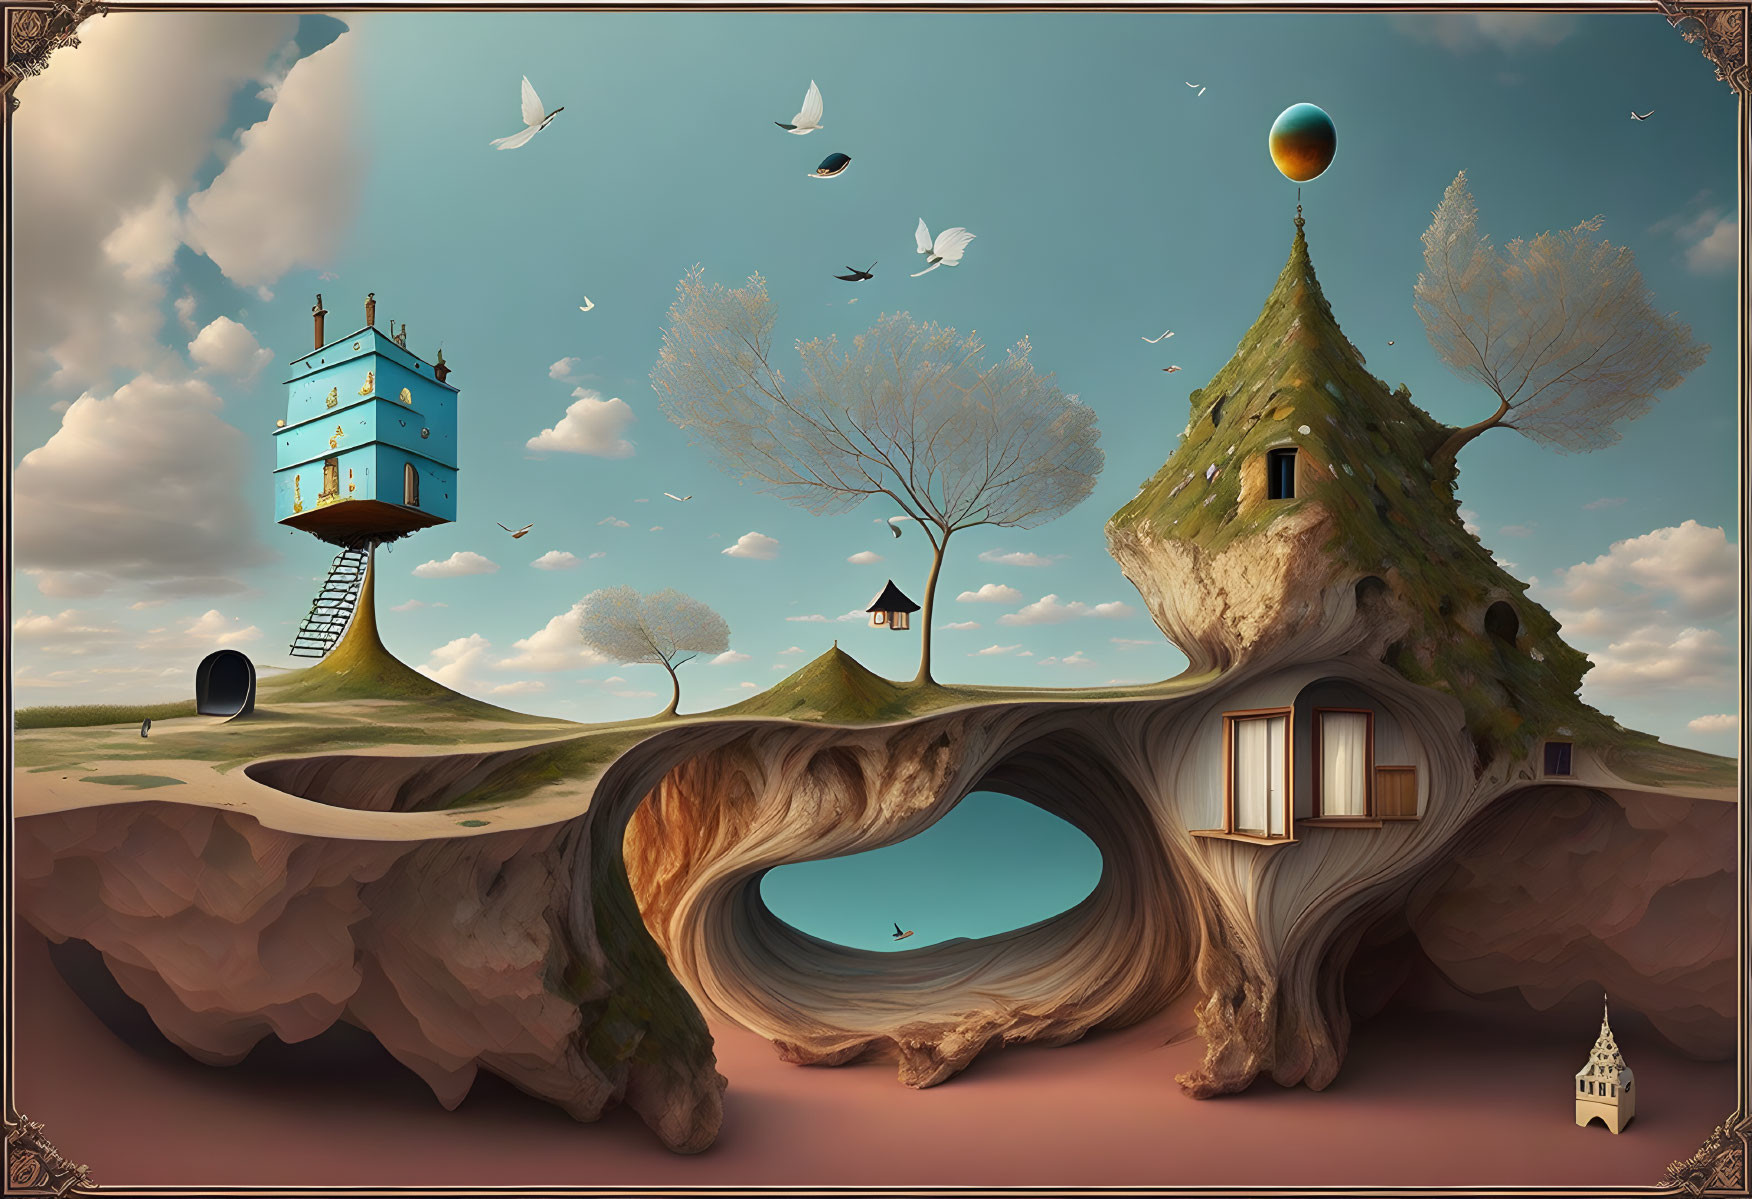 Whimsical landscape featuring floating island, tree-shaped building, hill tunnel, flying birds, and sky